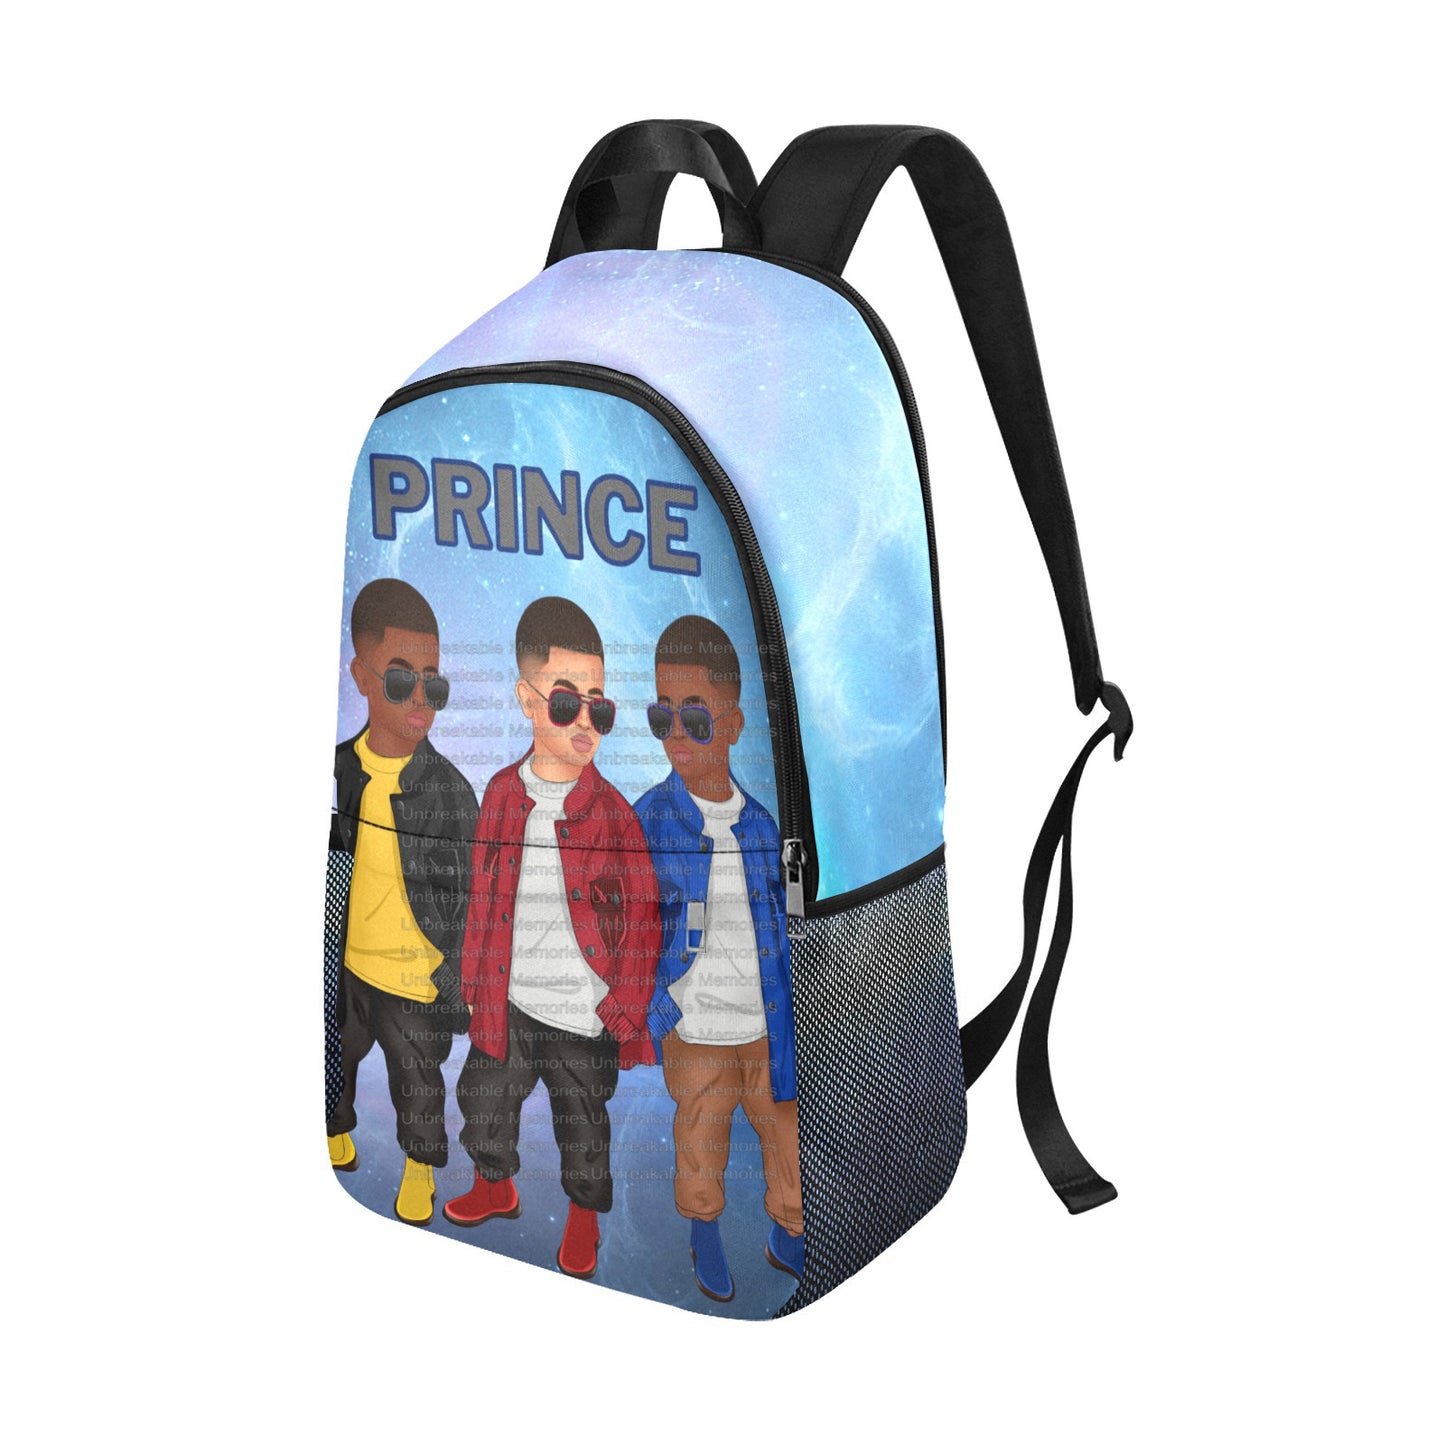 Prince Backpack with mesh side pockets